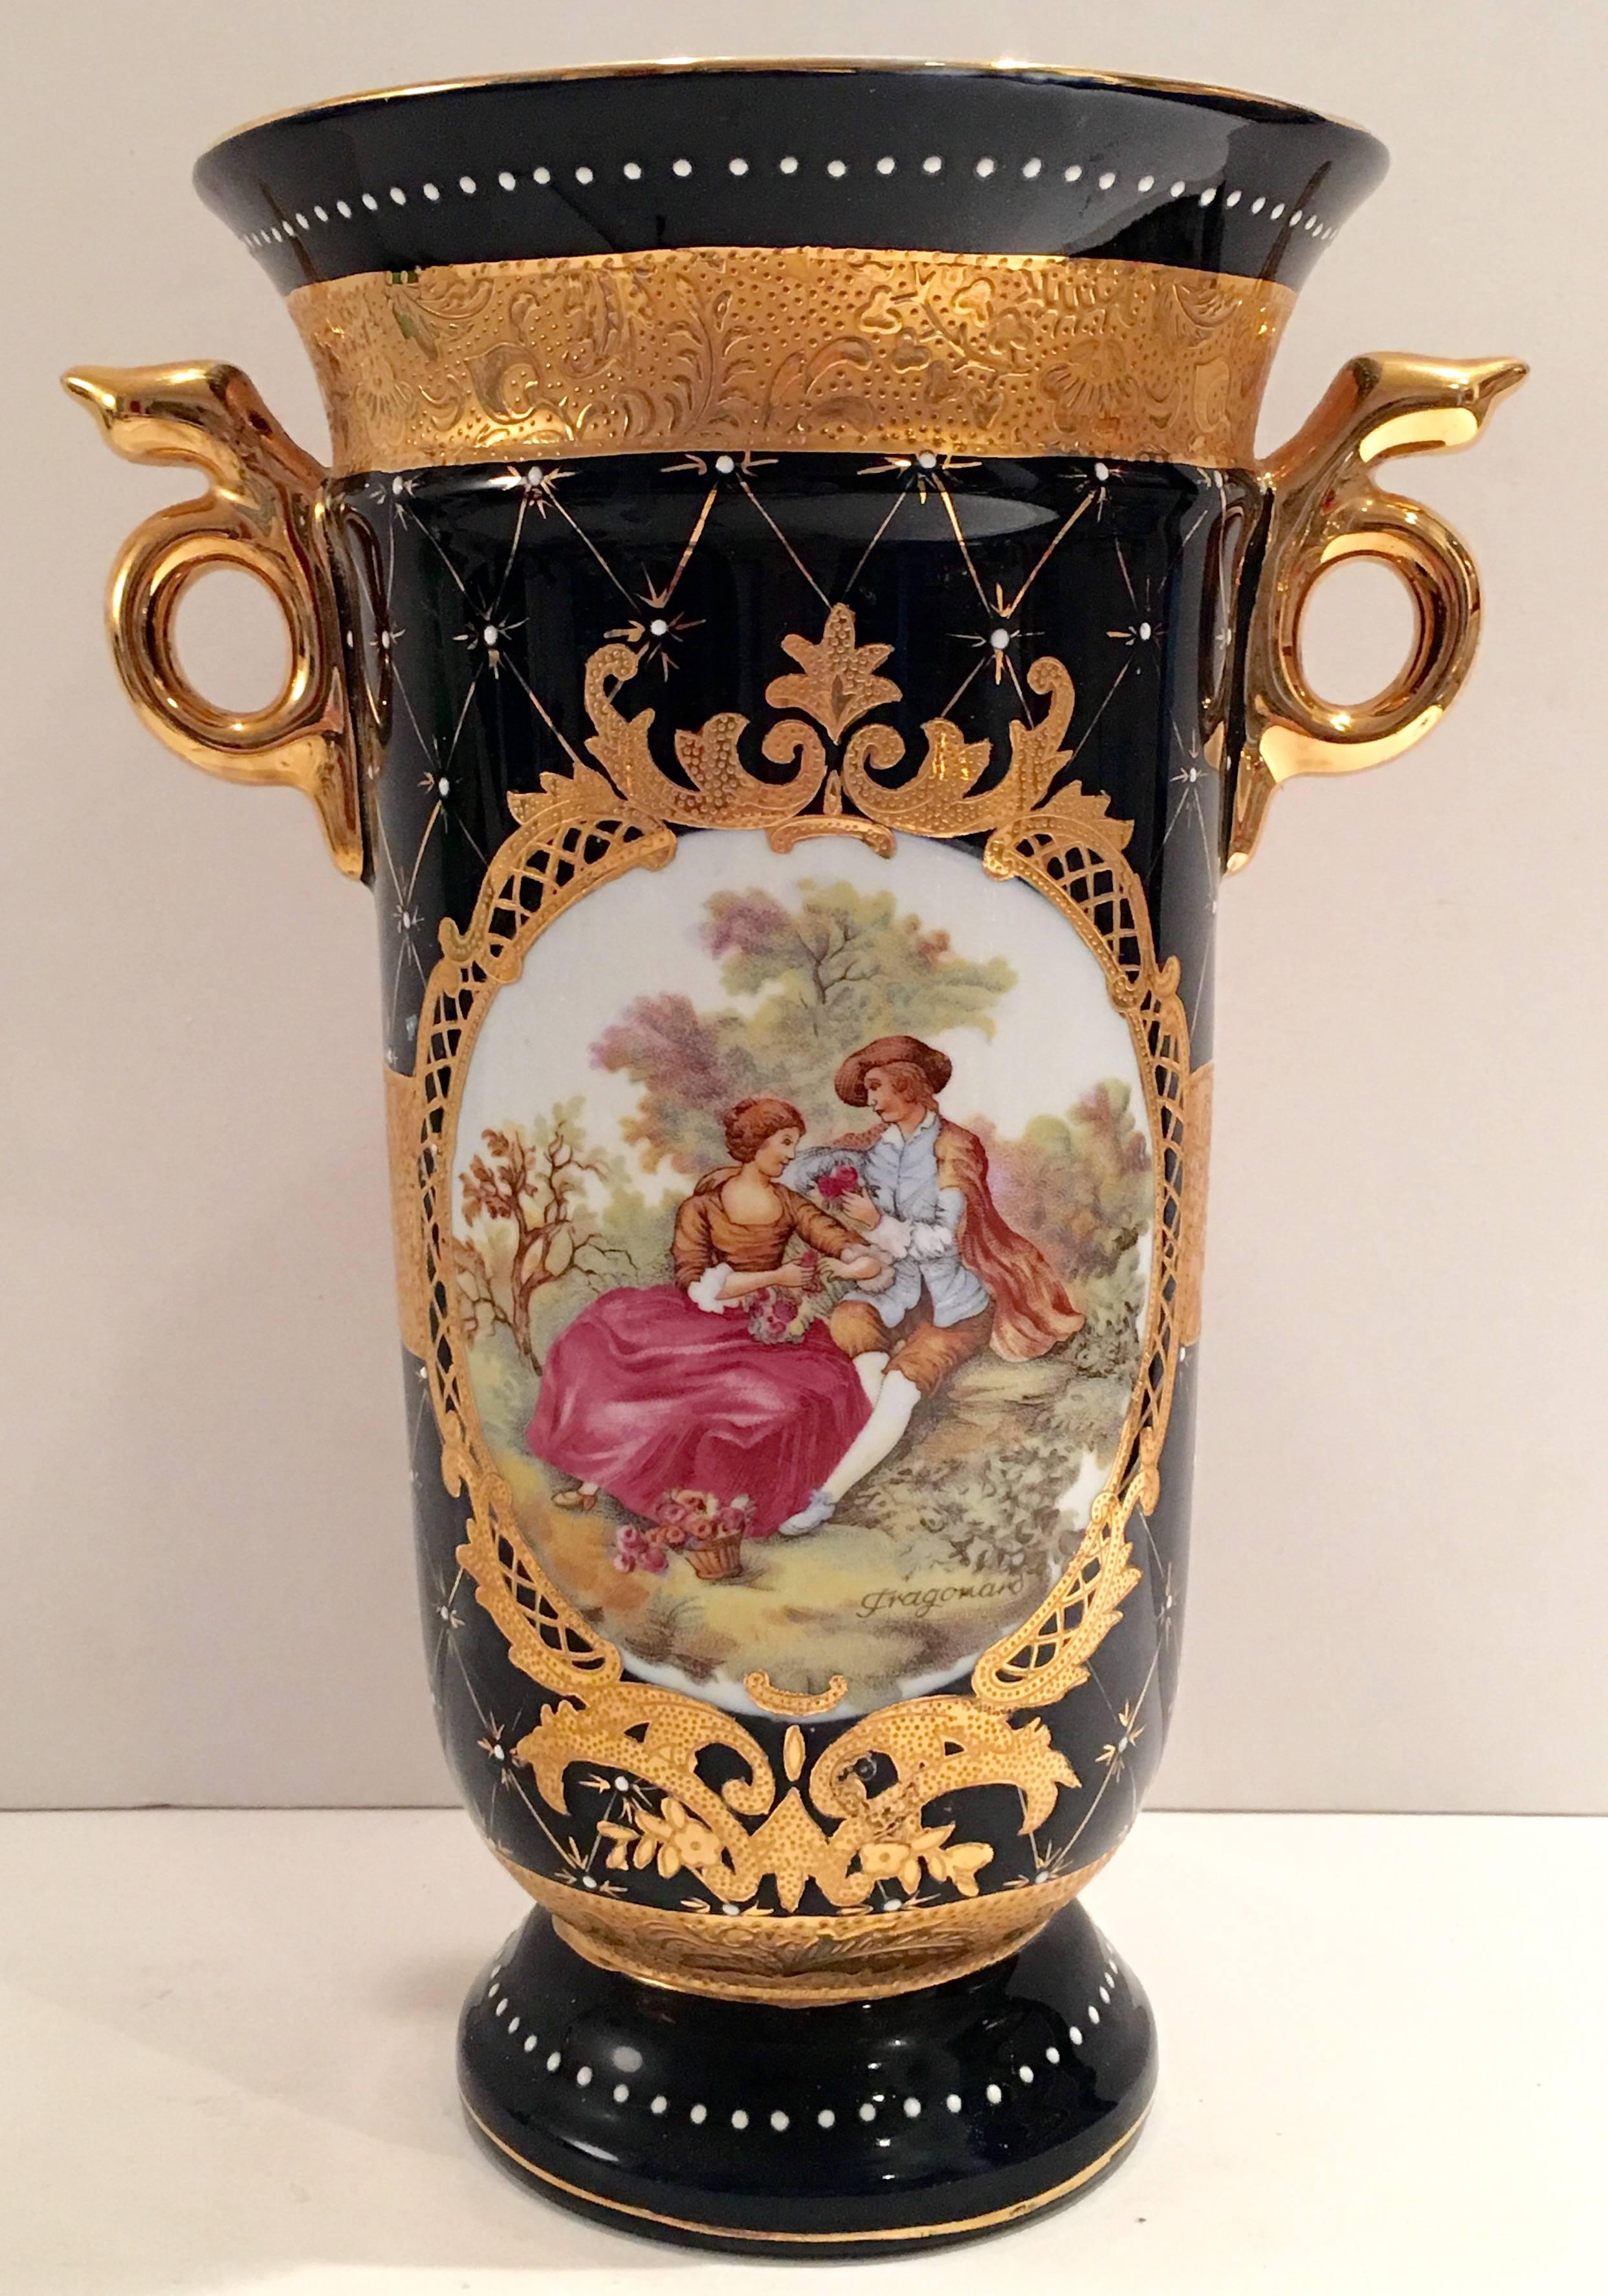 Limoges, P.R.C French Sevres style vase hand-painted in cobalt with 22-karat gold detail. Featuring a central 17th century courting couple motif and gold snake form handles. Signed on the underside, L.F. Limoges P.R.C. Handcrafted.